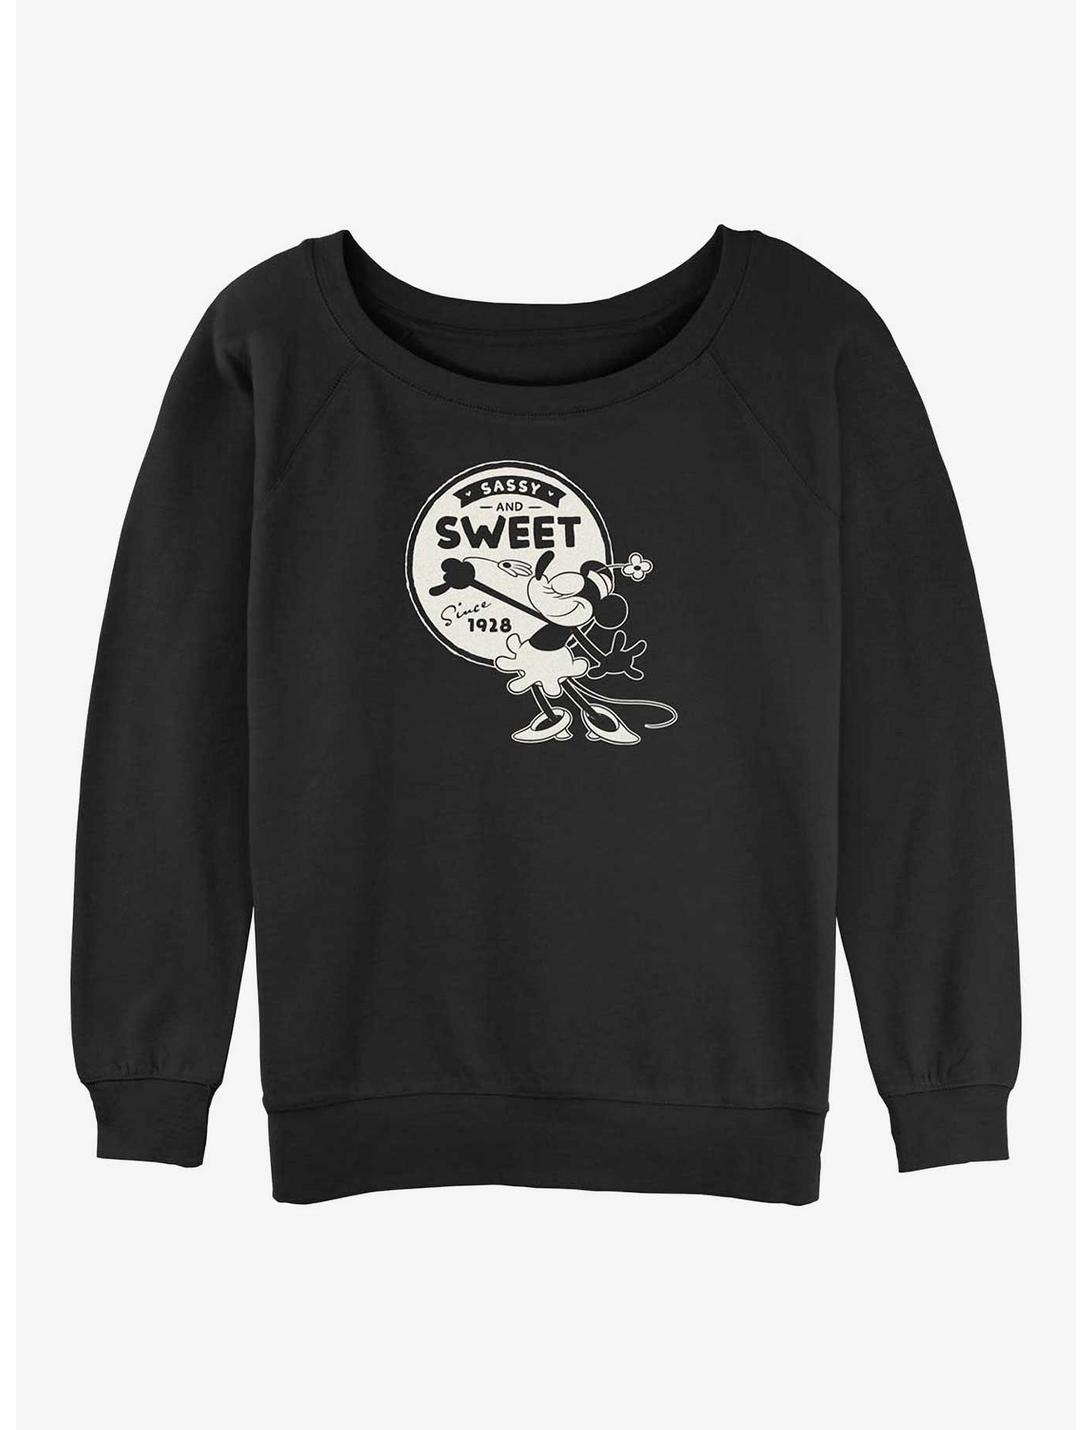 Disney100 Minnie Mouse Sassy And Sweet Since 1928 Womens Slouchy Sweatshirt, BLACK, hi-res